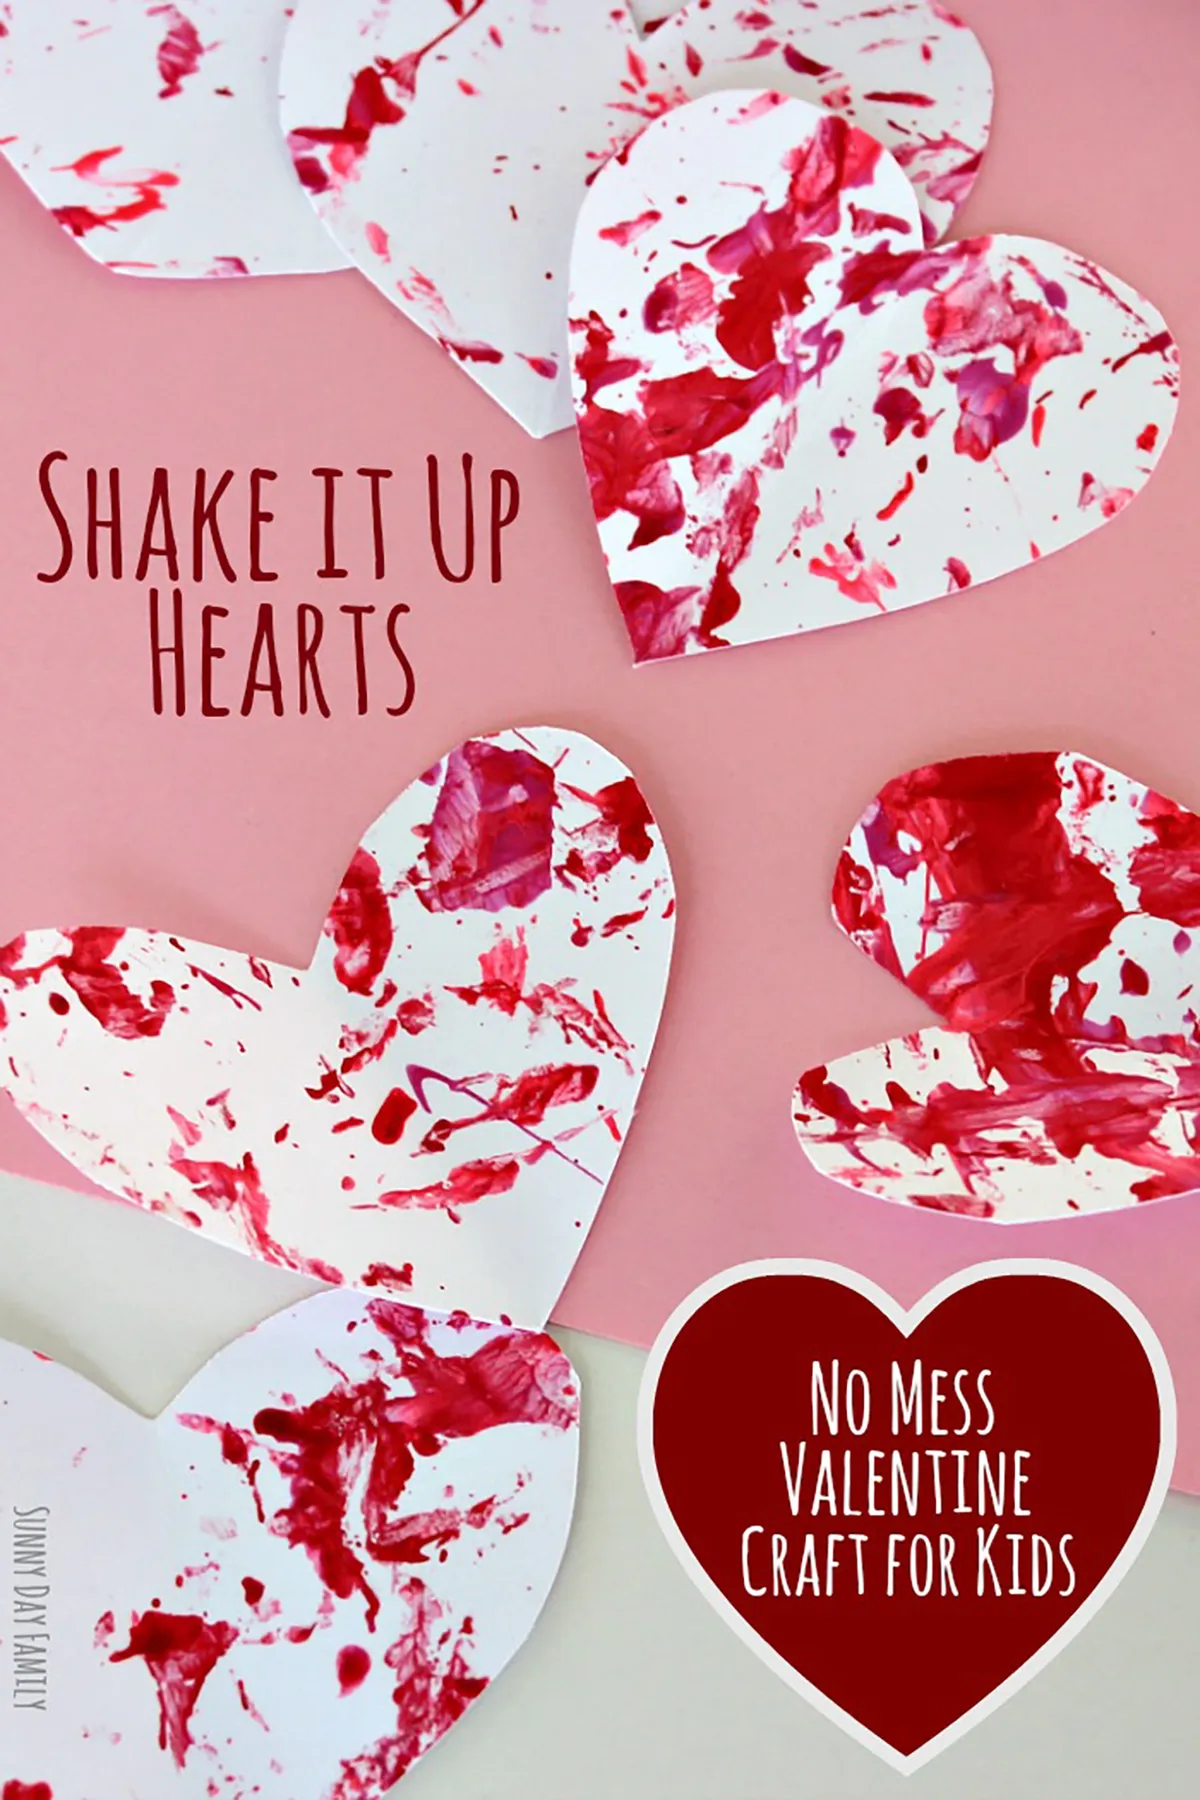 Paper hearts splashed with red paint - valentines crafts for kids